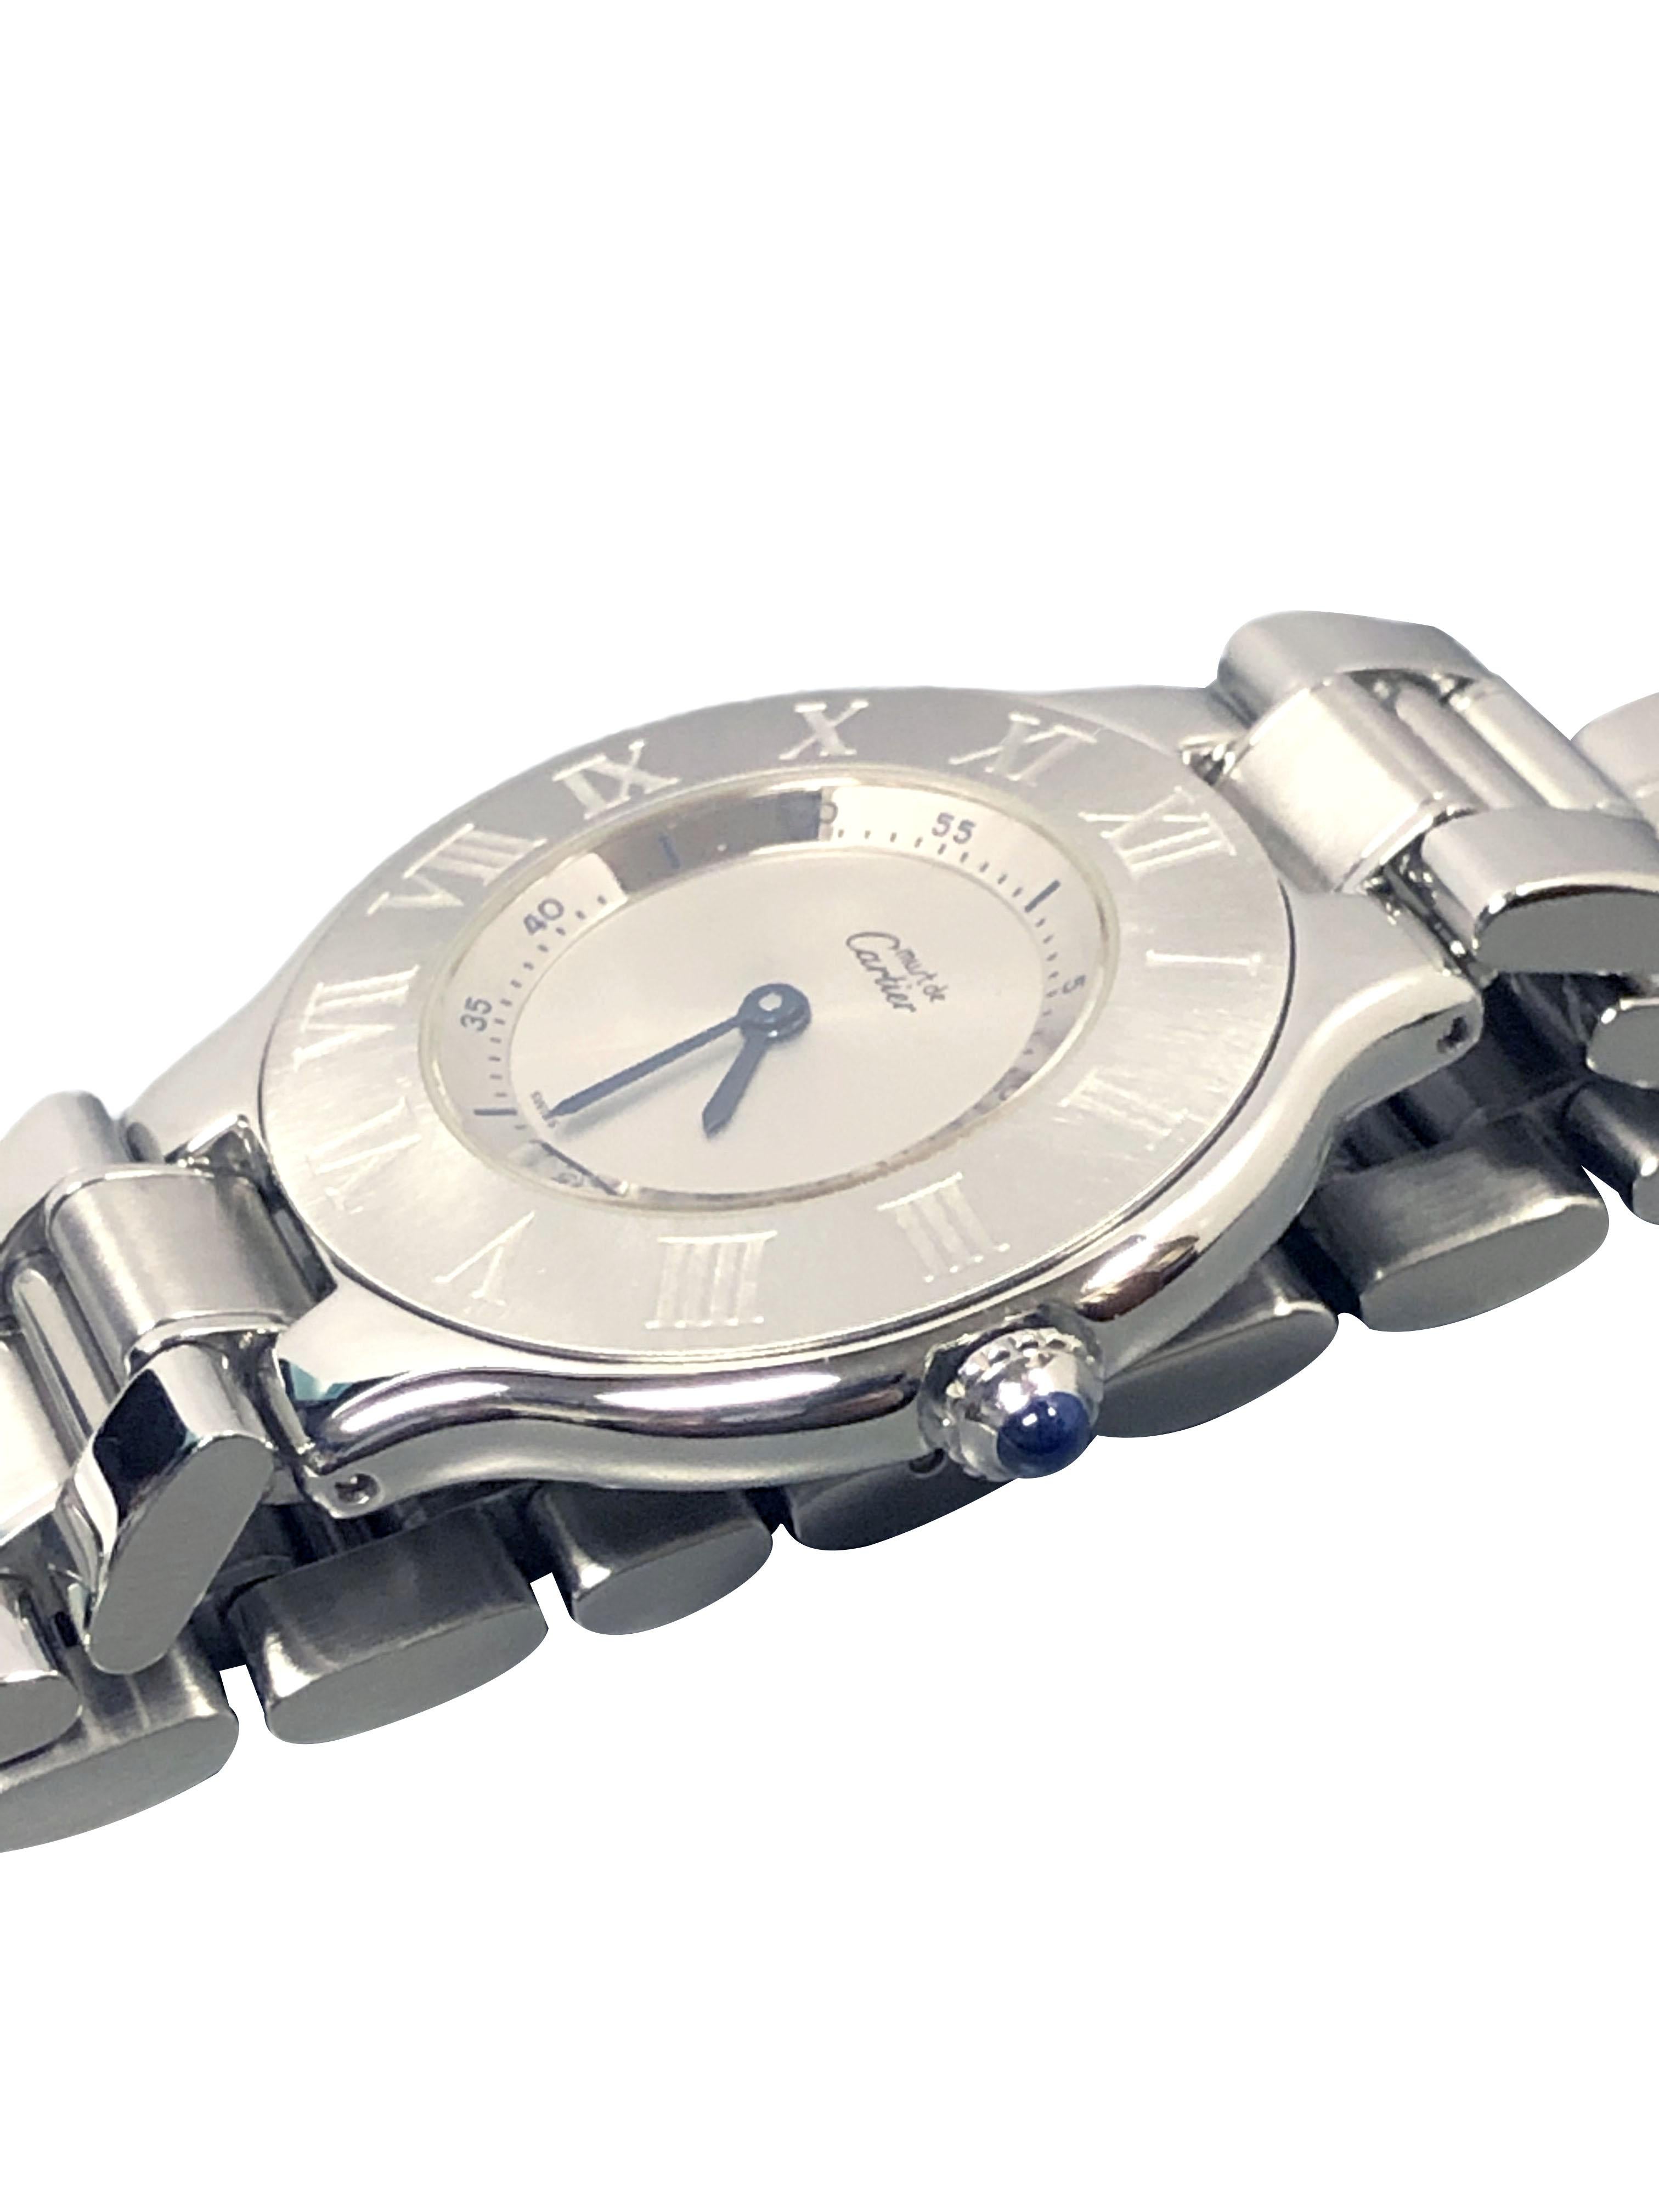 Circa 2000 Cartier Must 21 Reference 1330 mid size Wrist Watch, 31 M.M. Stainless Steel Water Resistant case, Quartz Movement, Silver Dial, Roman Numeral Bezel, Sapphire Crown. 1/2 inch wide Stainless Steel bracelet with fold over Deployment clasp.